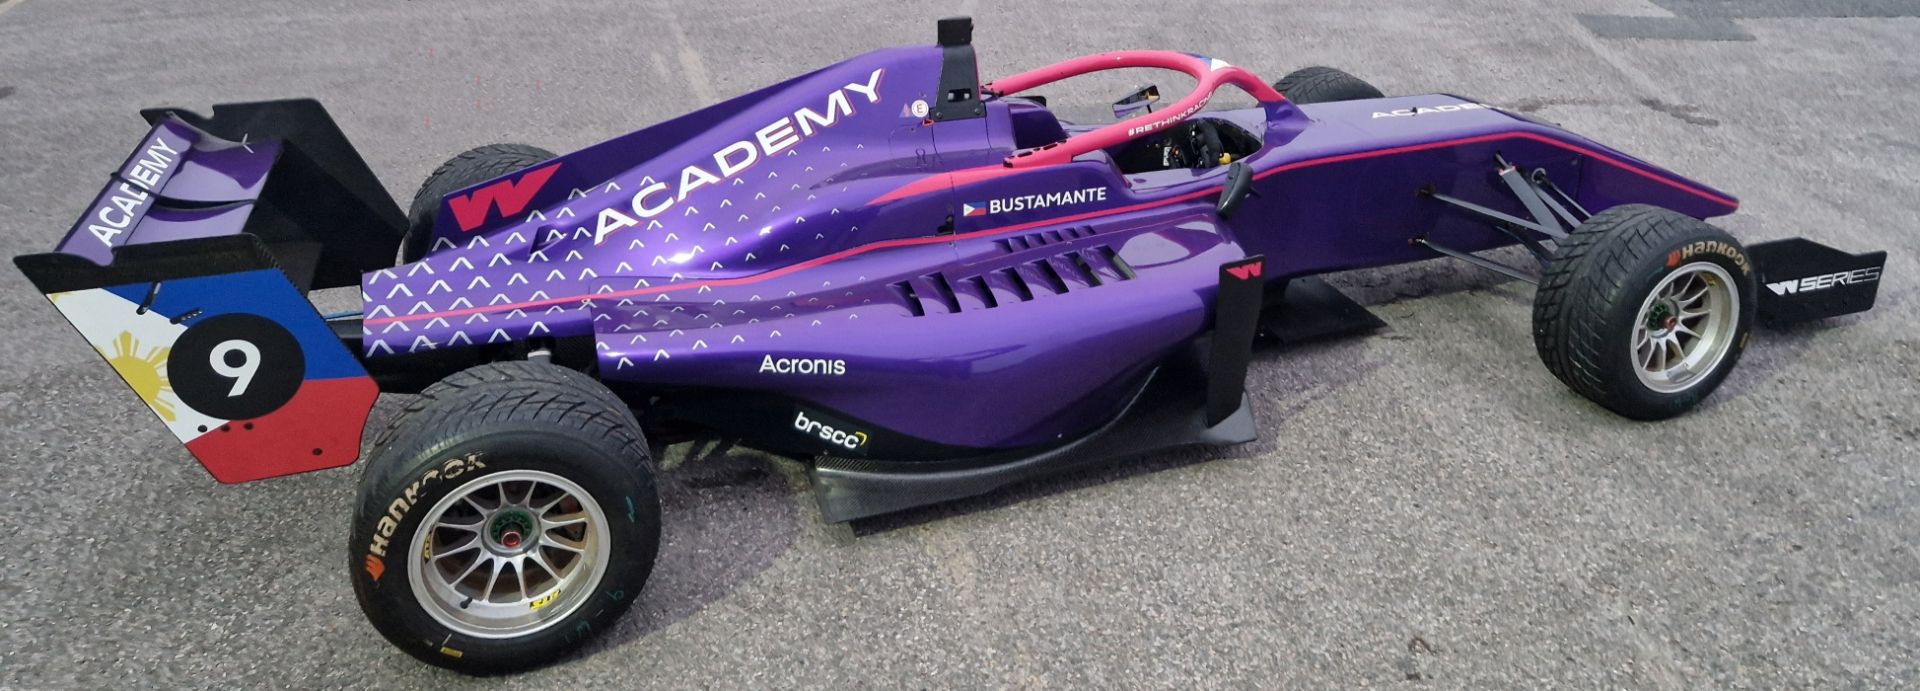 One TATUUS F3 T-318 Alfa Romeo Race Car Chassis No. 057 (2019) Finished in the W Series Academy - Image 2 of 10